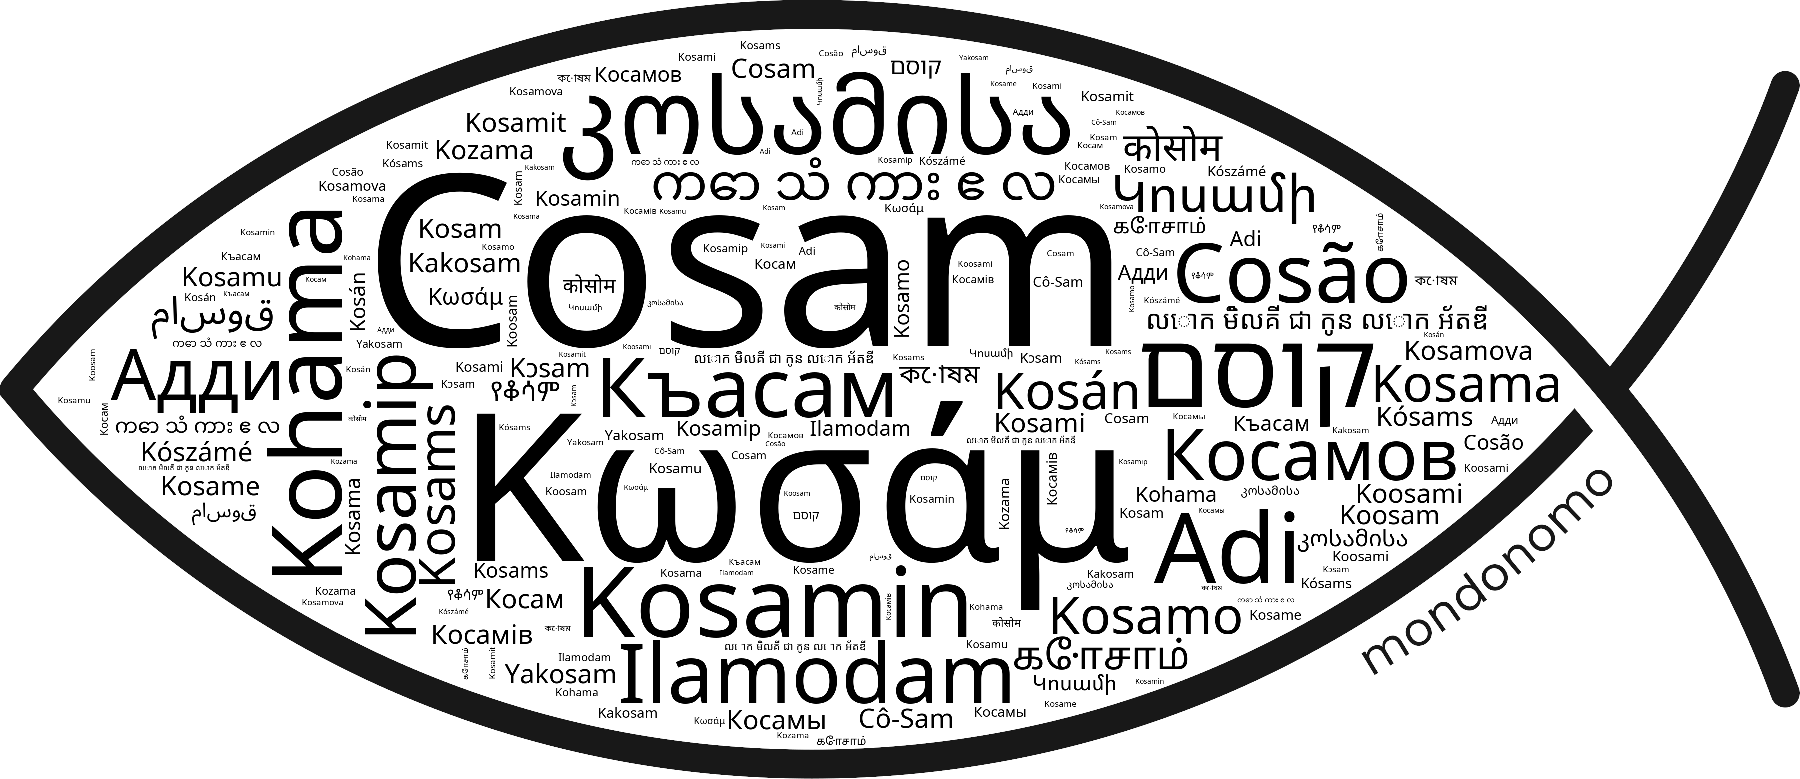 Name Cosam in the world's Bibles